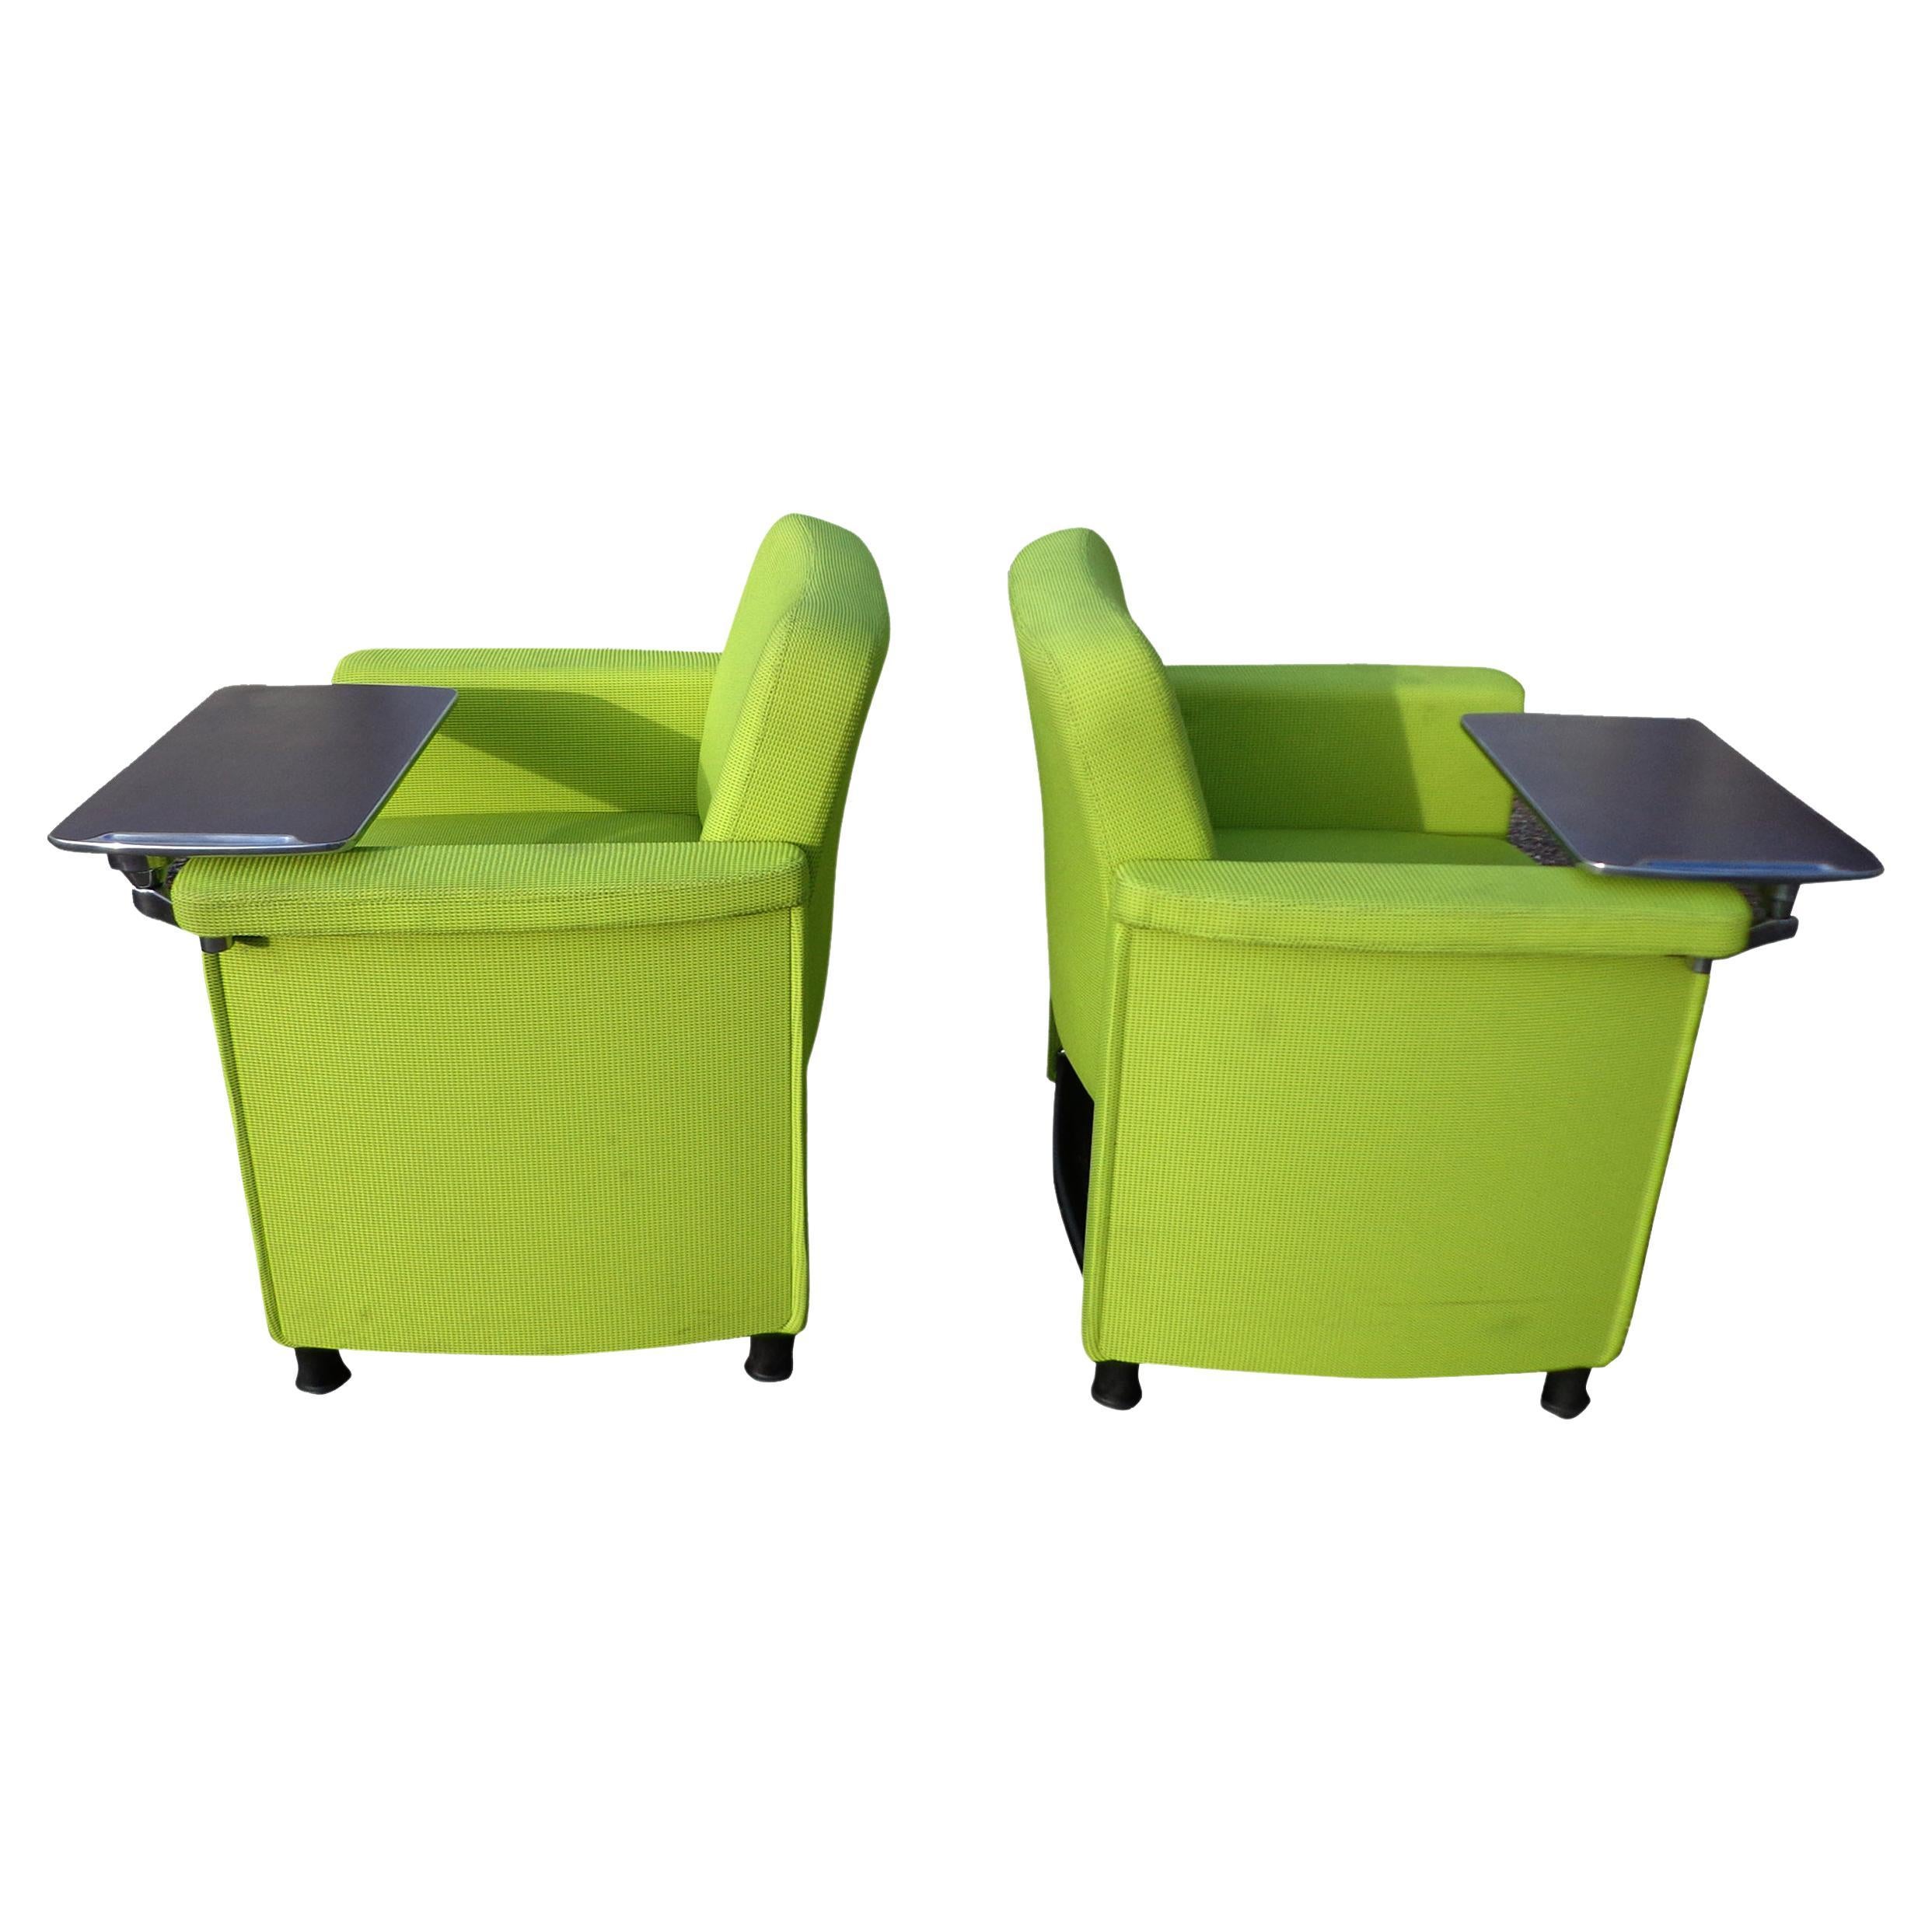 Pair Teknion Belize Lounge Chairs with Tablet For Sale